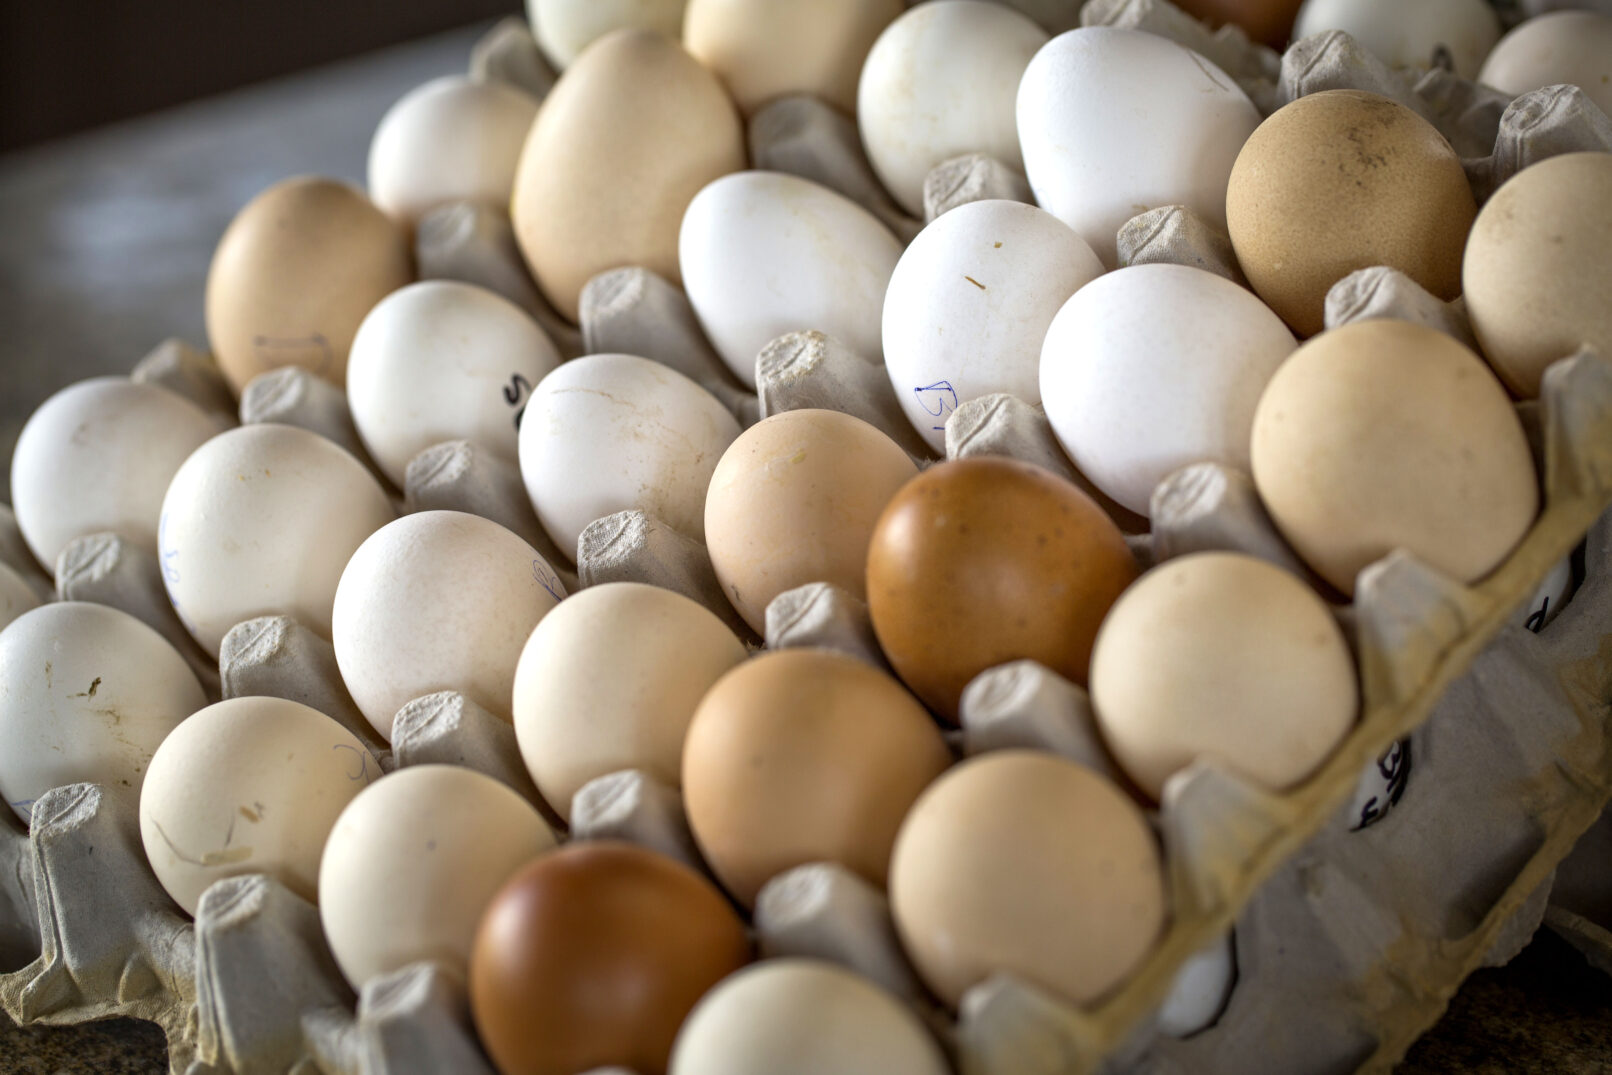 A large carton of colorful eggs in all shades of neutral tones.